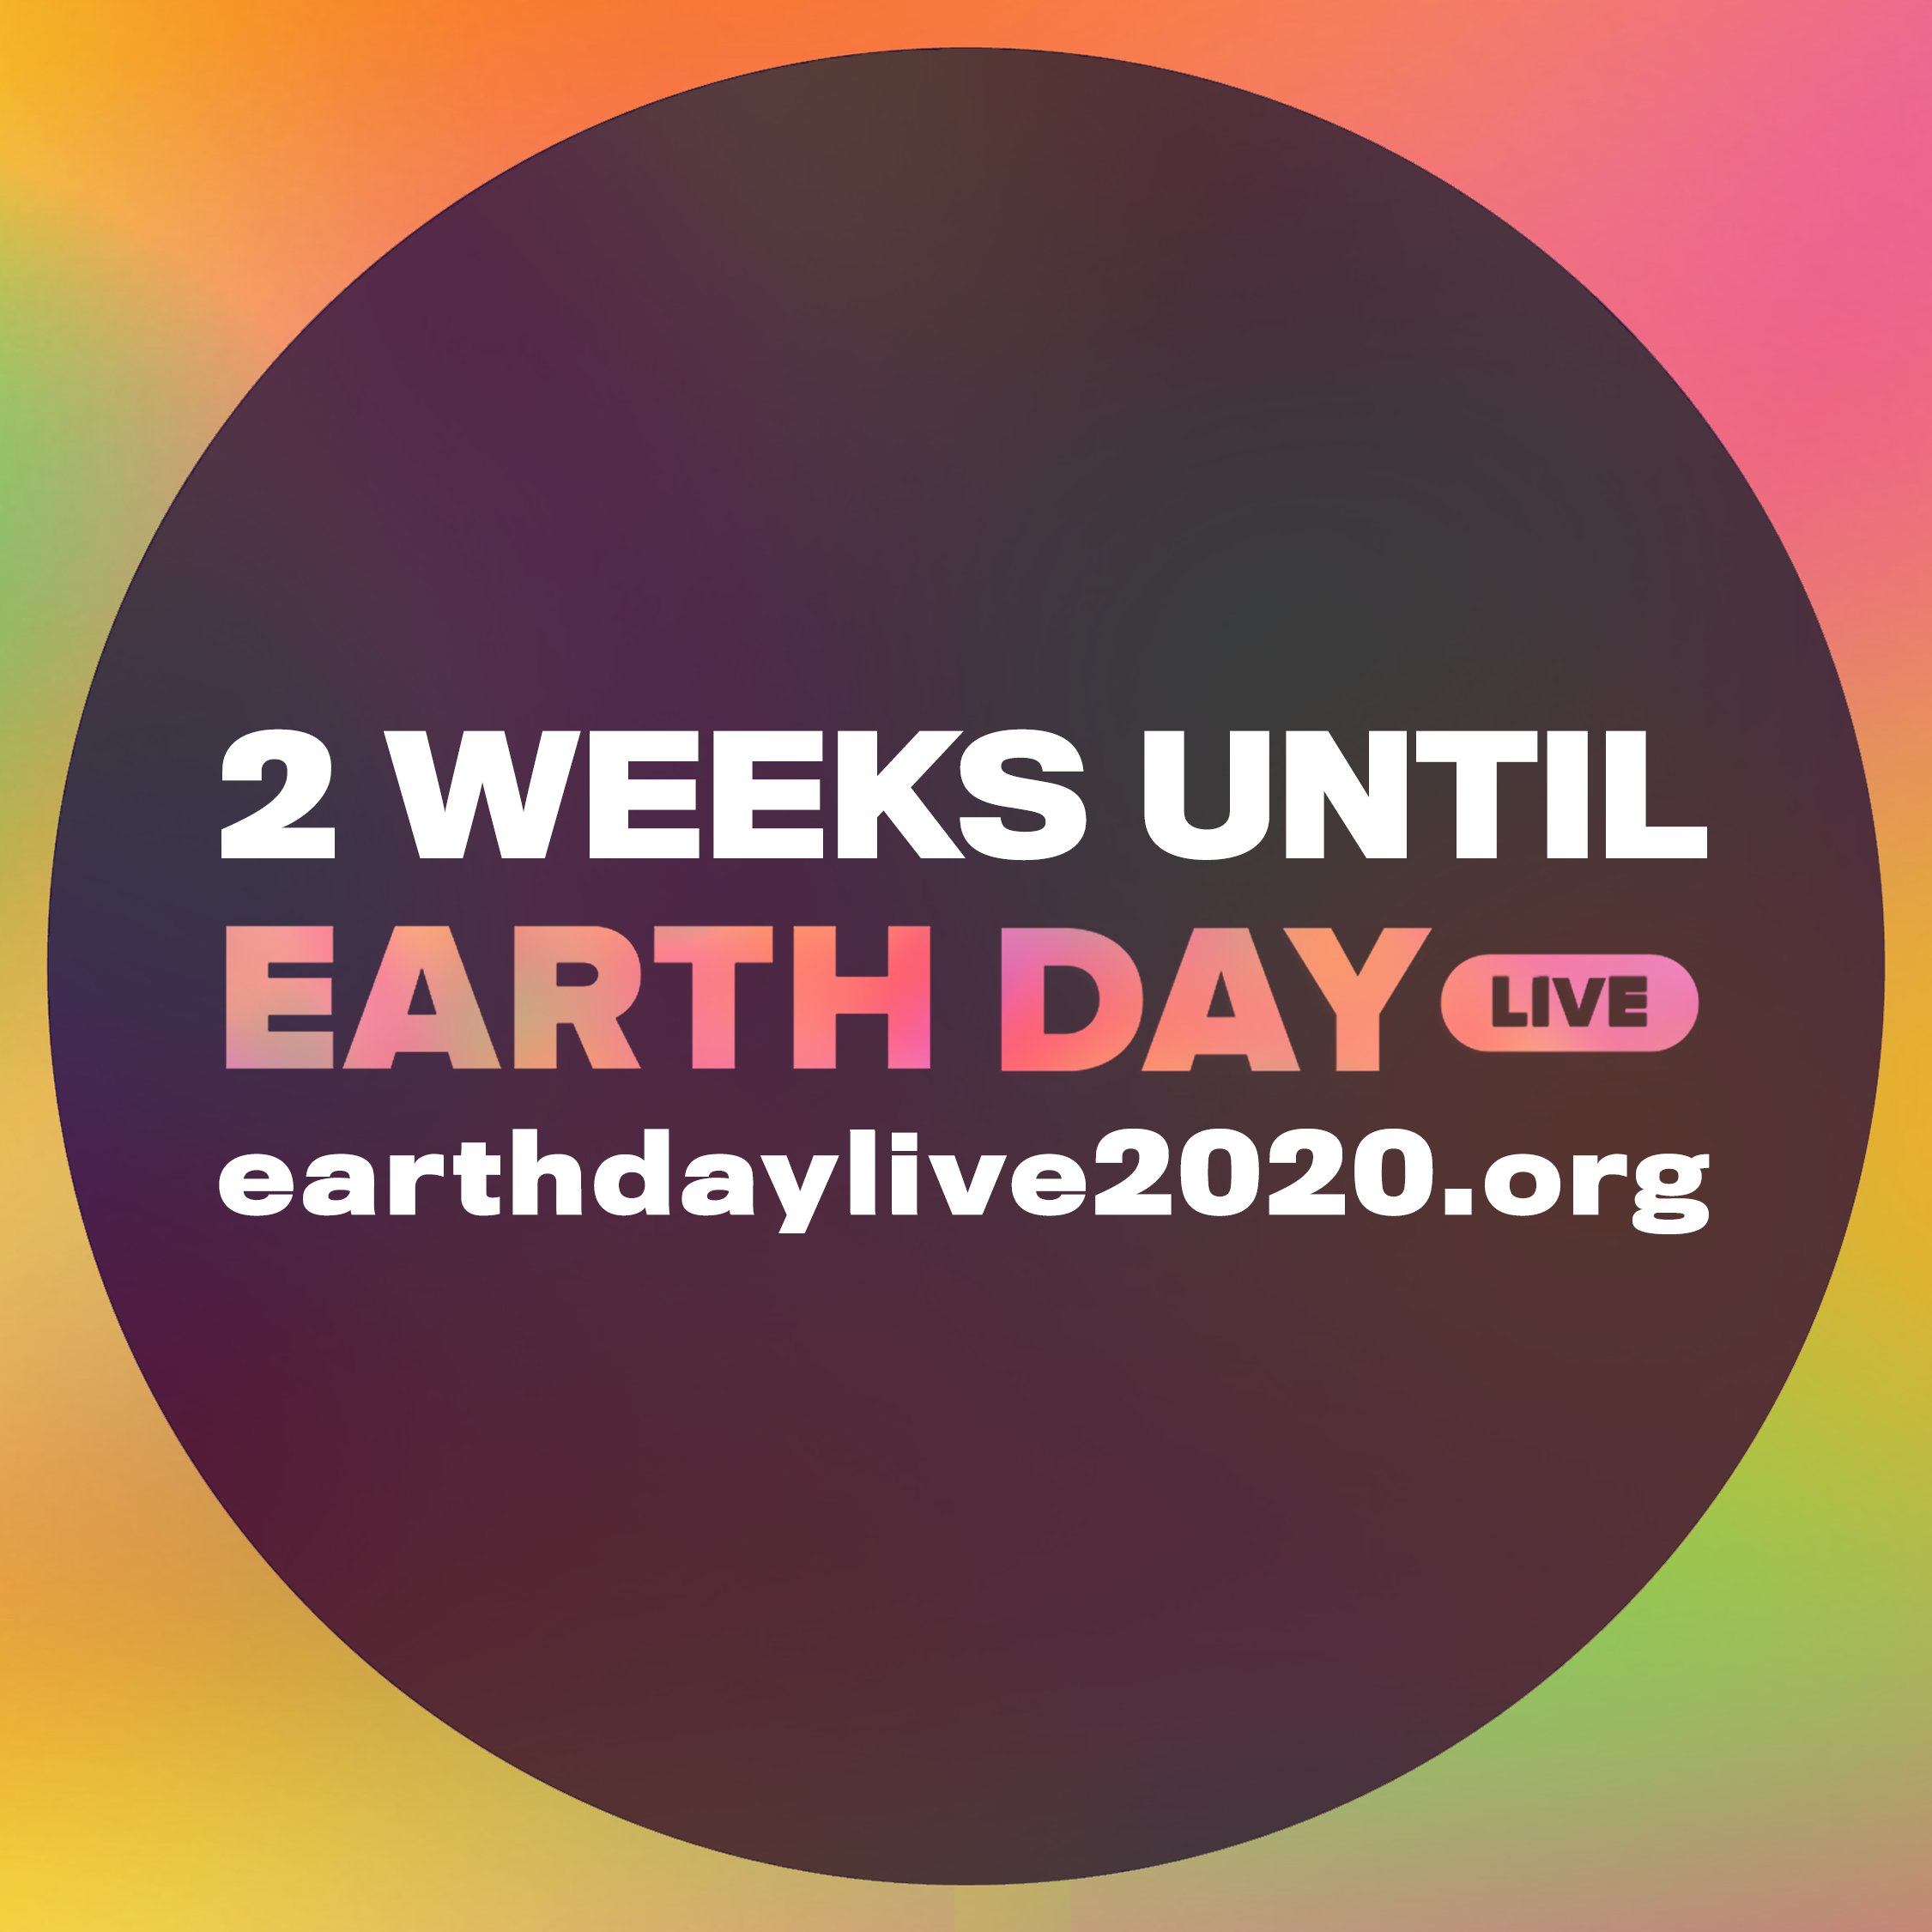 2 weeks until Earth Day Live